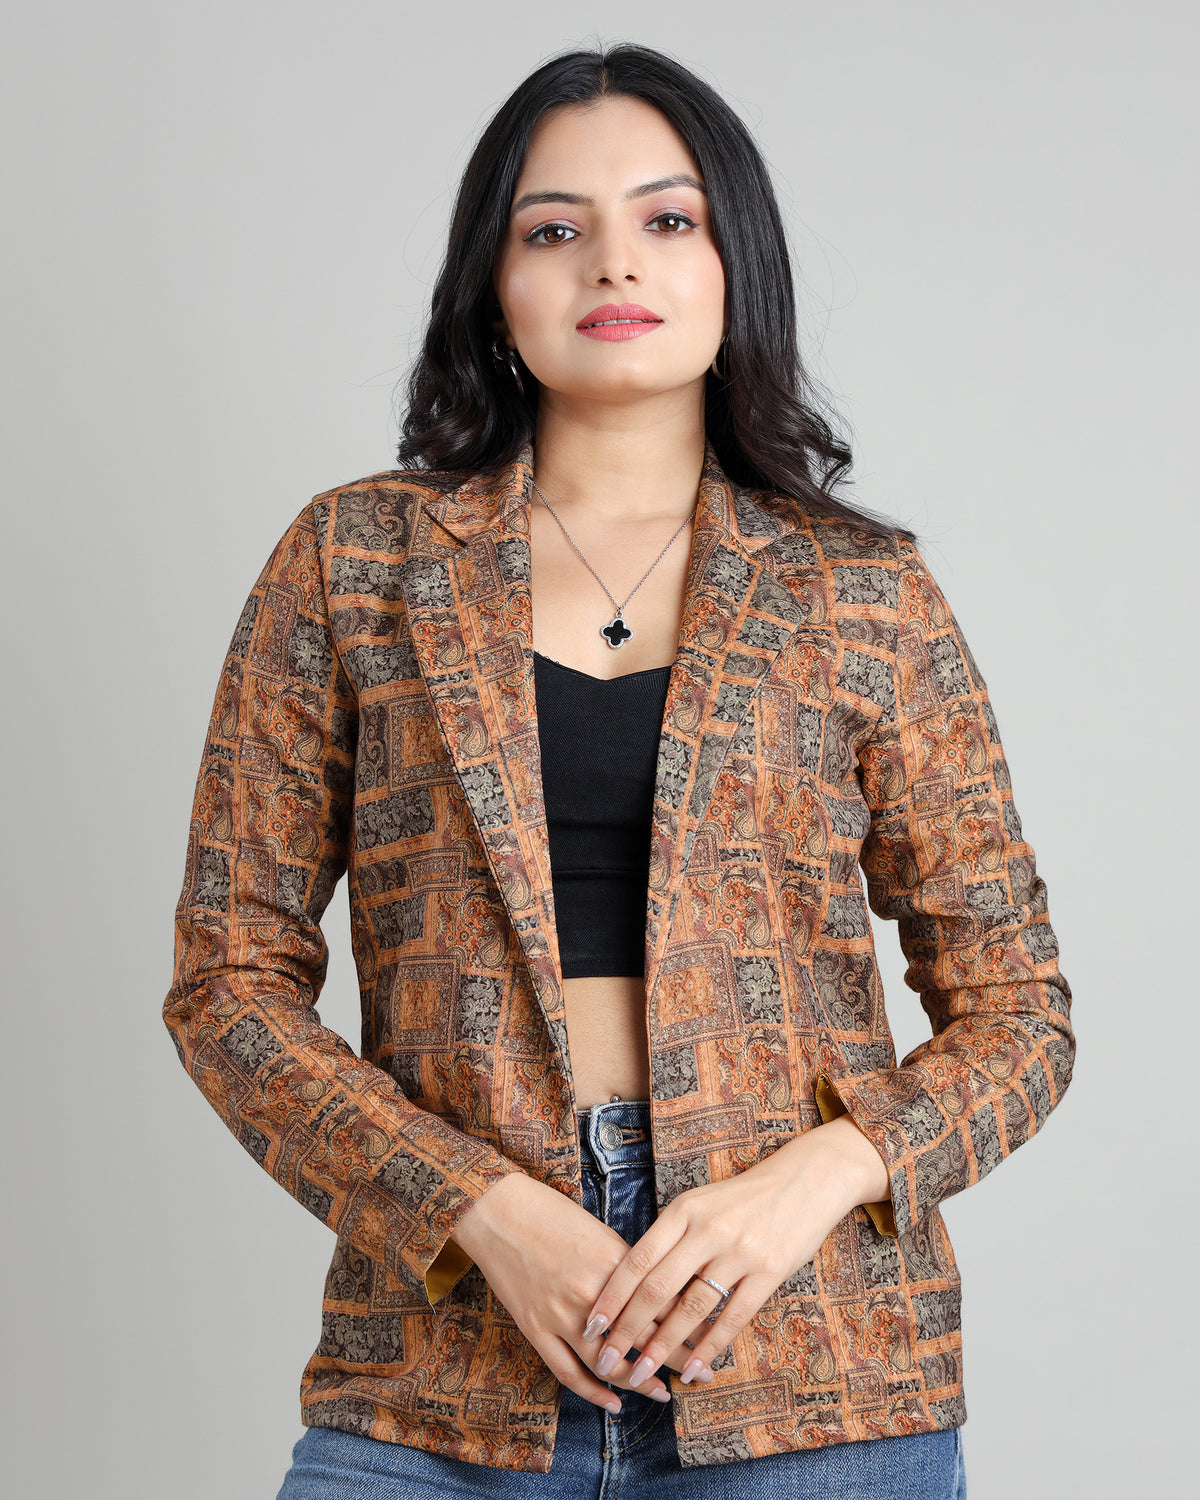 Pashmina Luxe: A Jacket For The World Stage